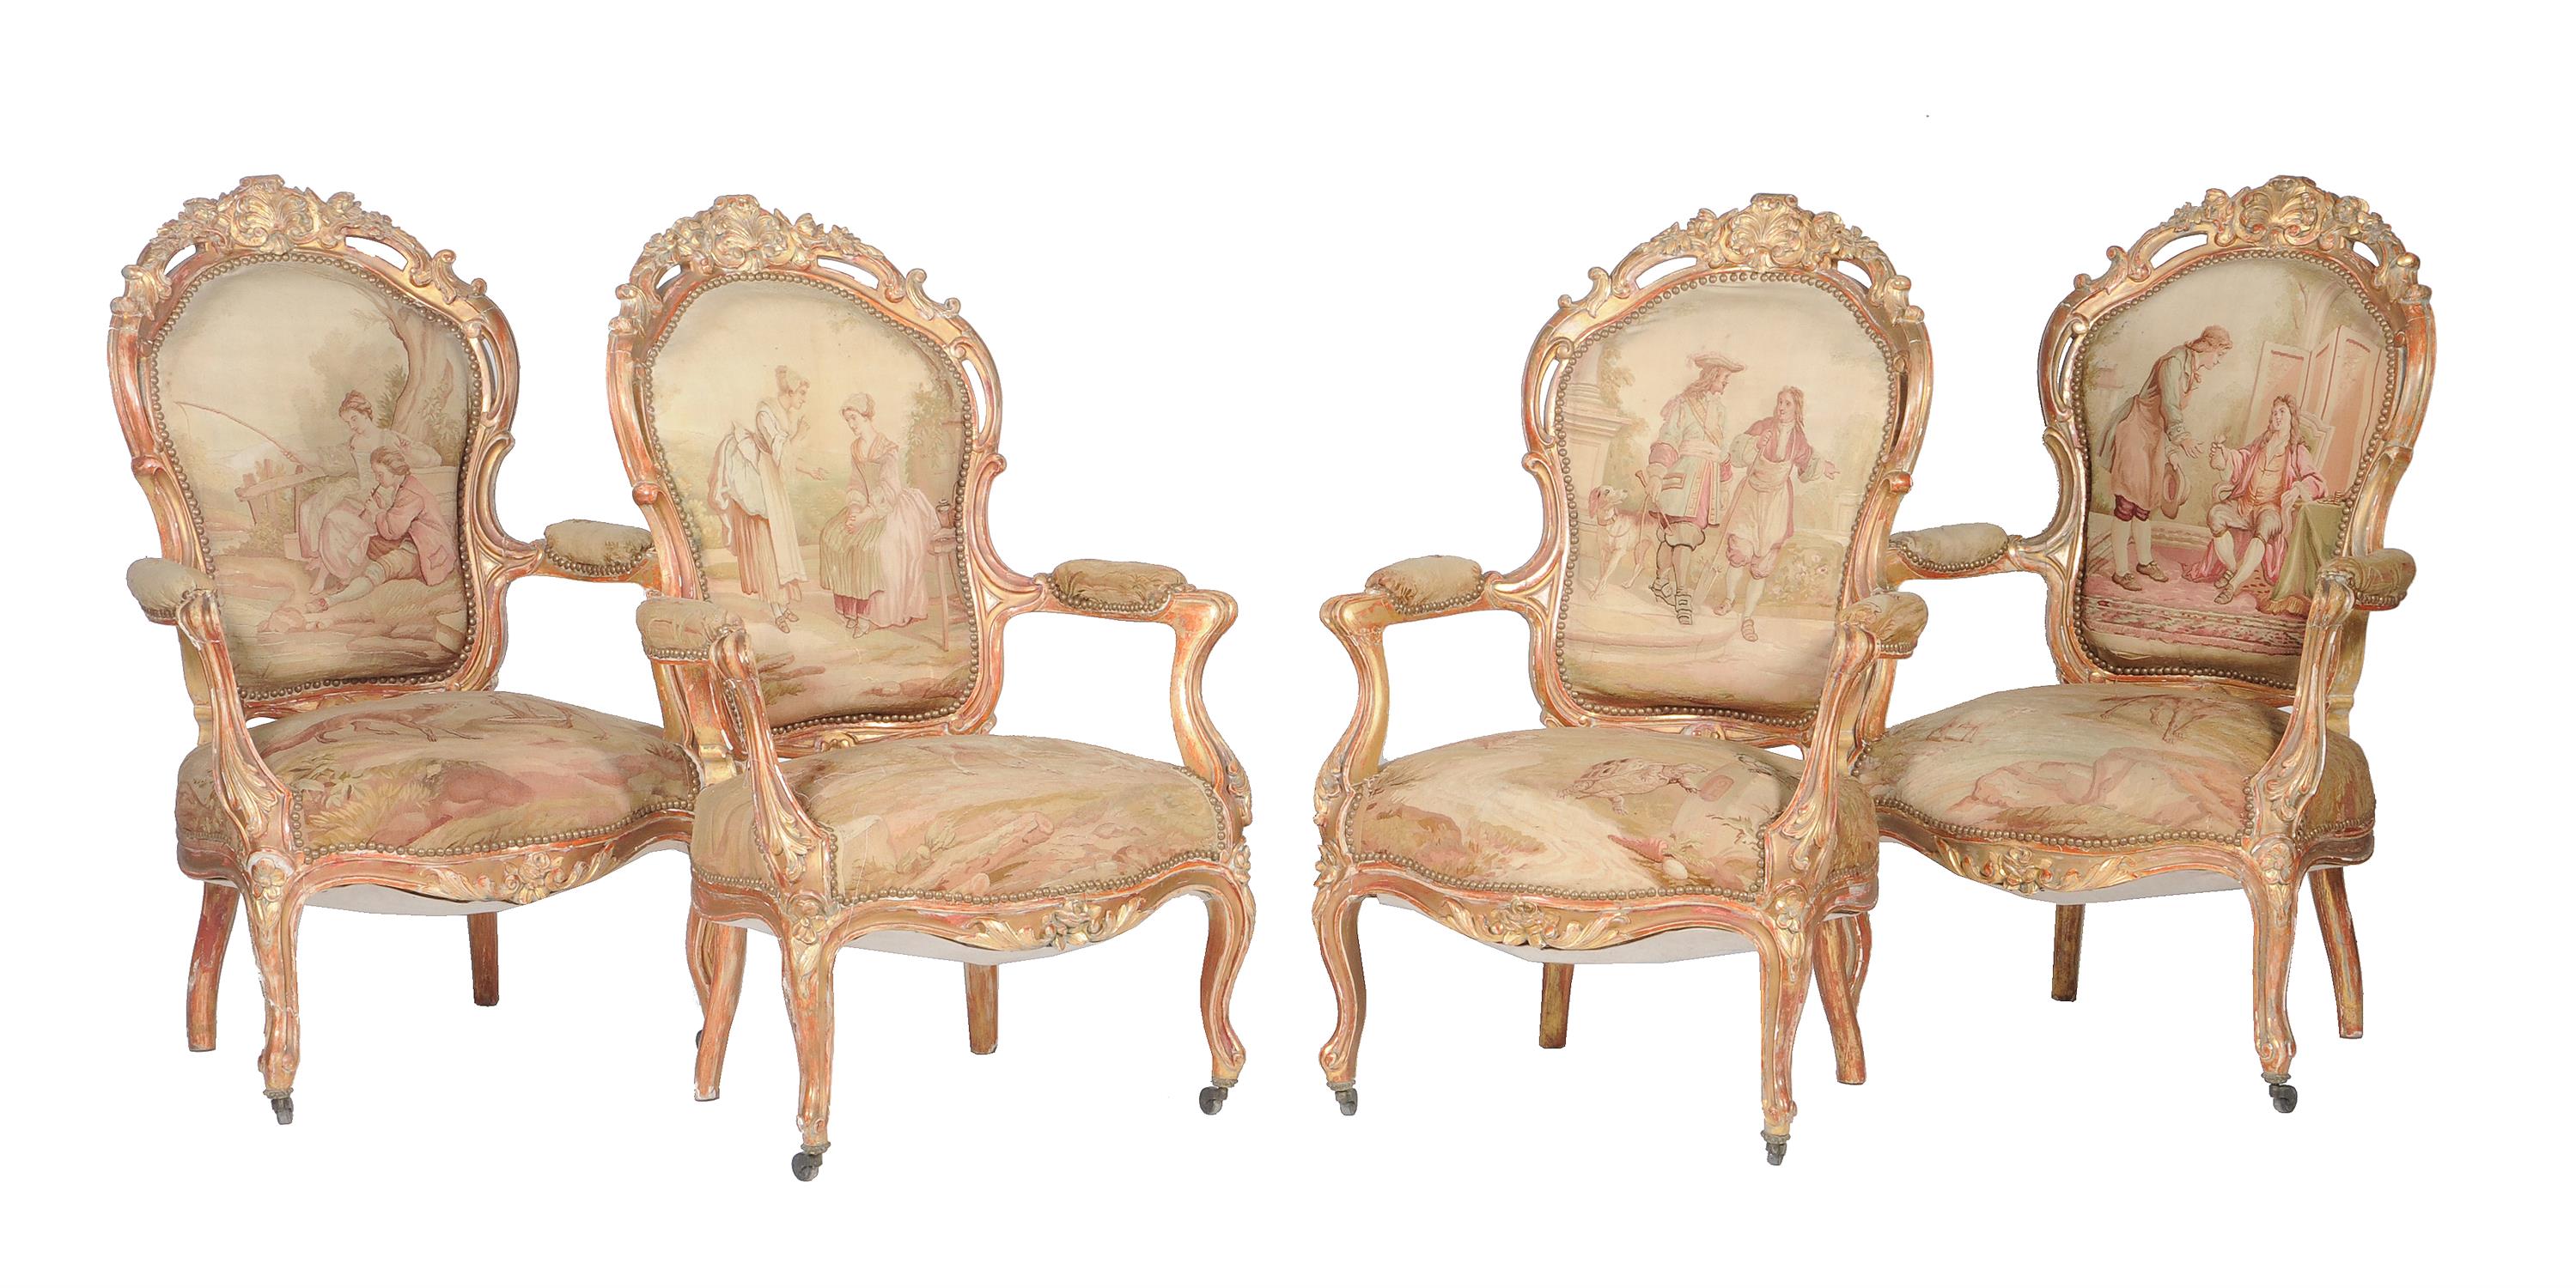 A set of four rubbed gilt fauteuils in Louis XV style